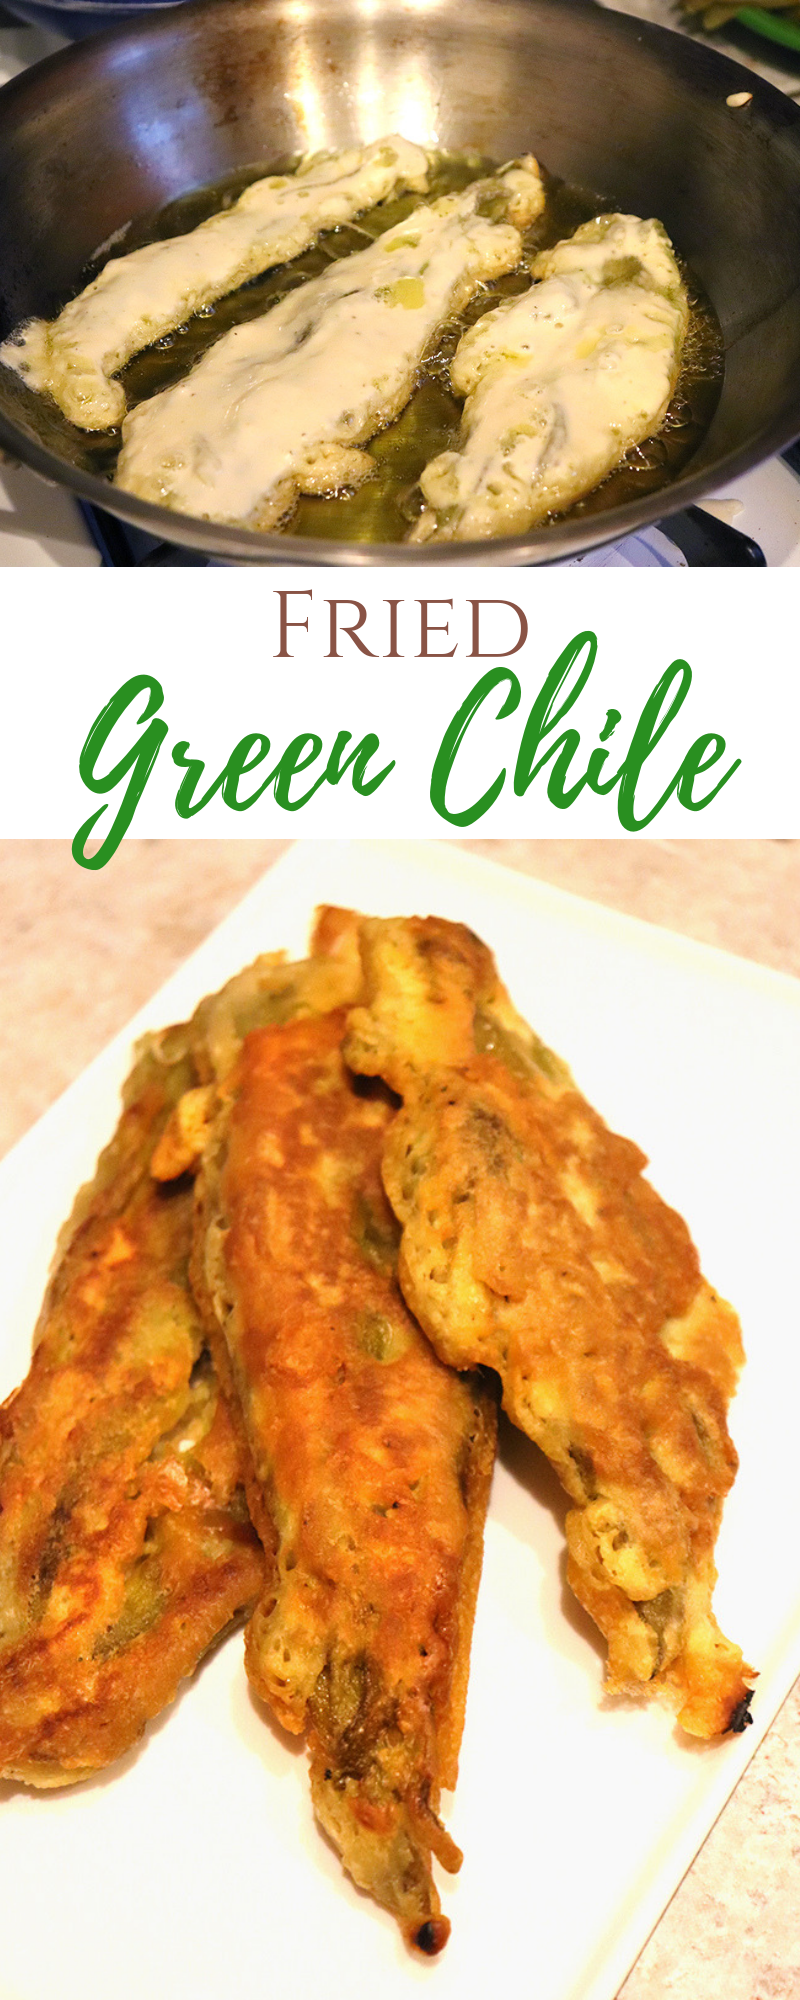 Fried Green Chile Strips made with New Mexican Green Chile | NewMexicanFoodie.com -   22 new mexican recipes
 ideas